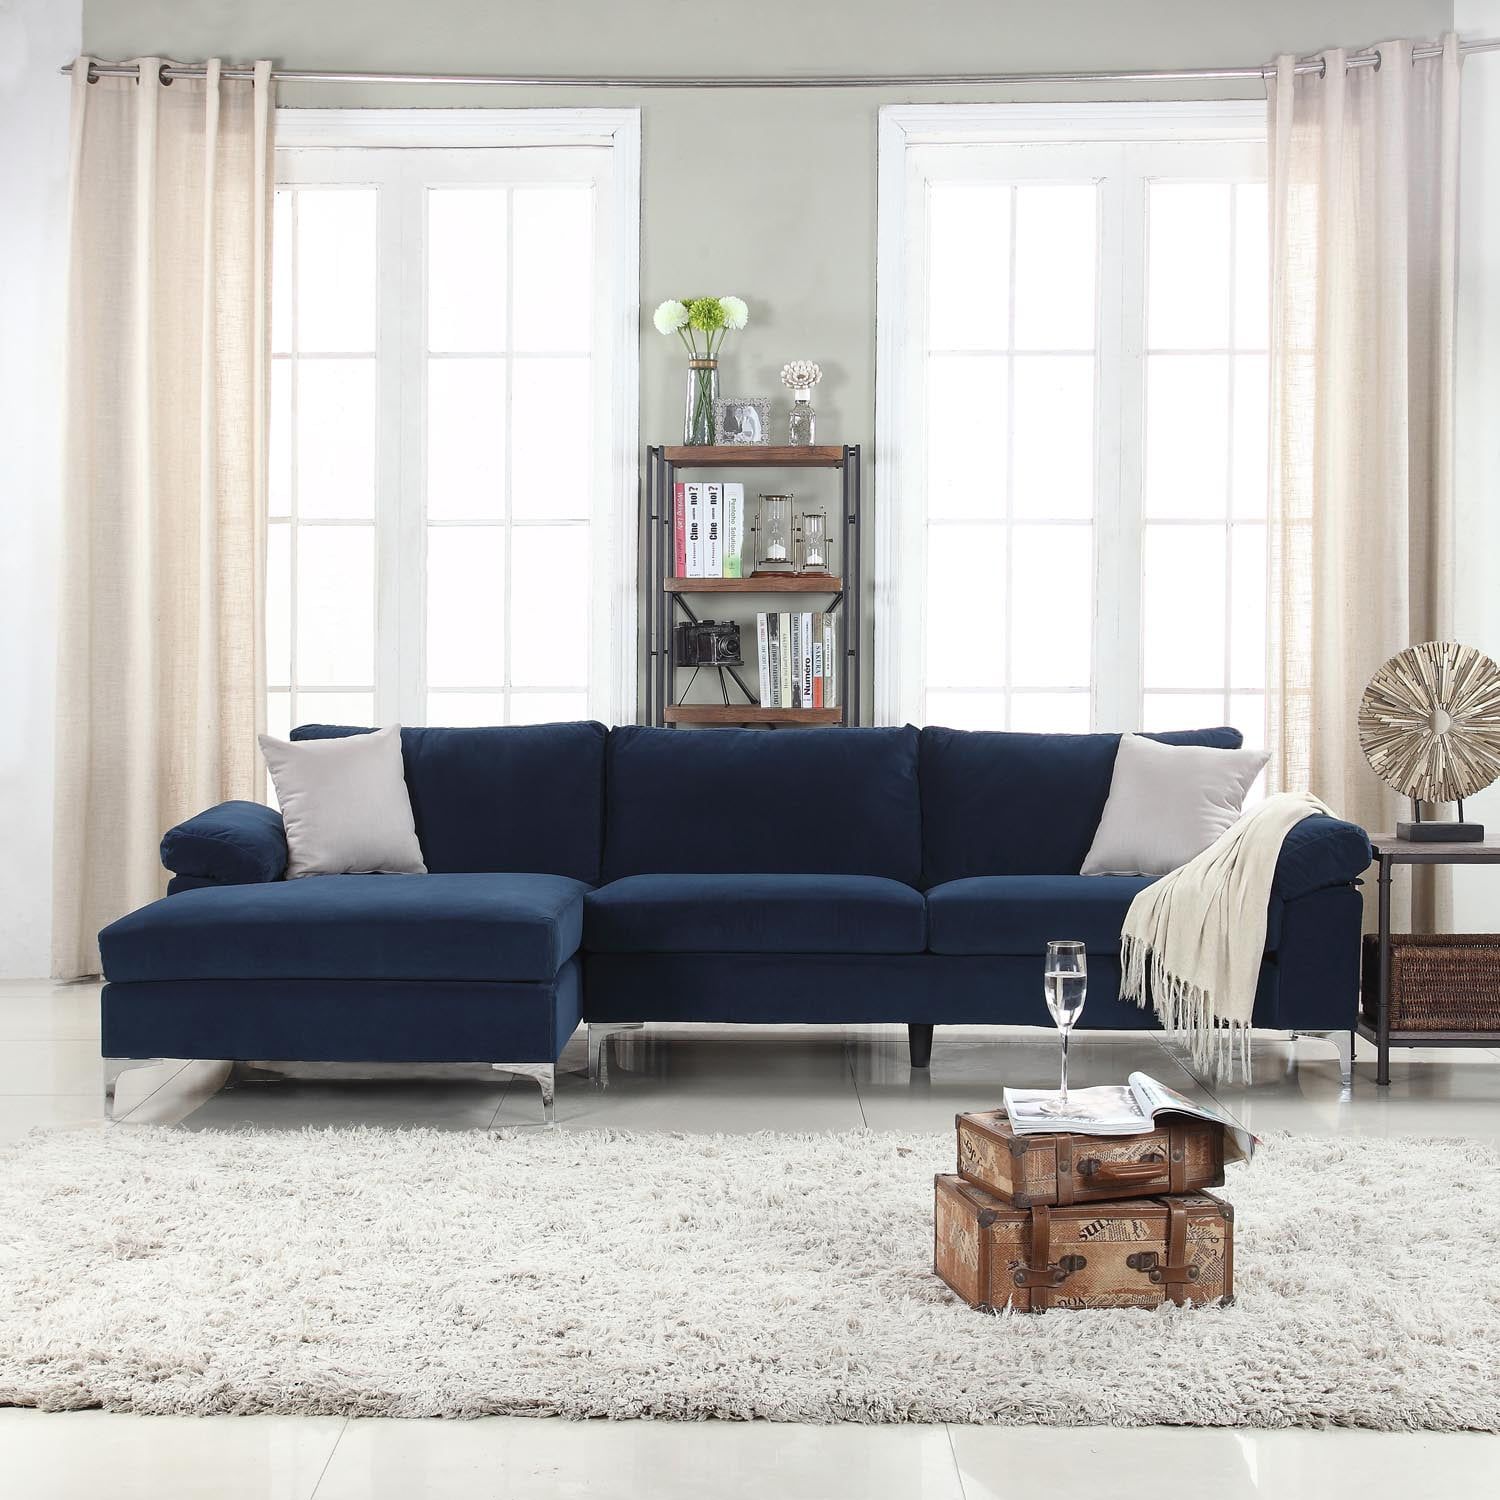 Modern Velvet Fabric Sectional Sofa, Large L Shape Couch With Wide With Regard To Modern Velvet Sofa Recliners With Storage (View 15 of 20)